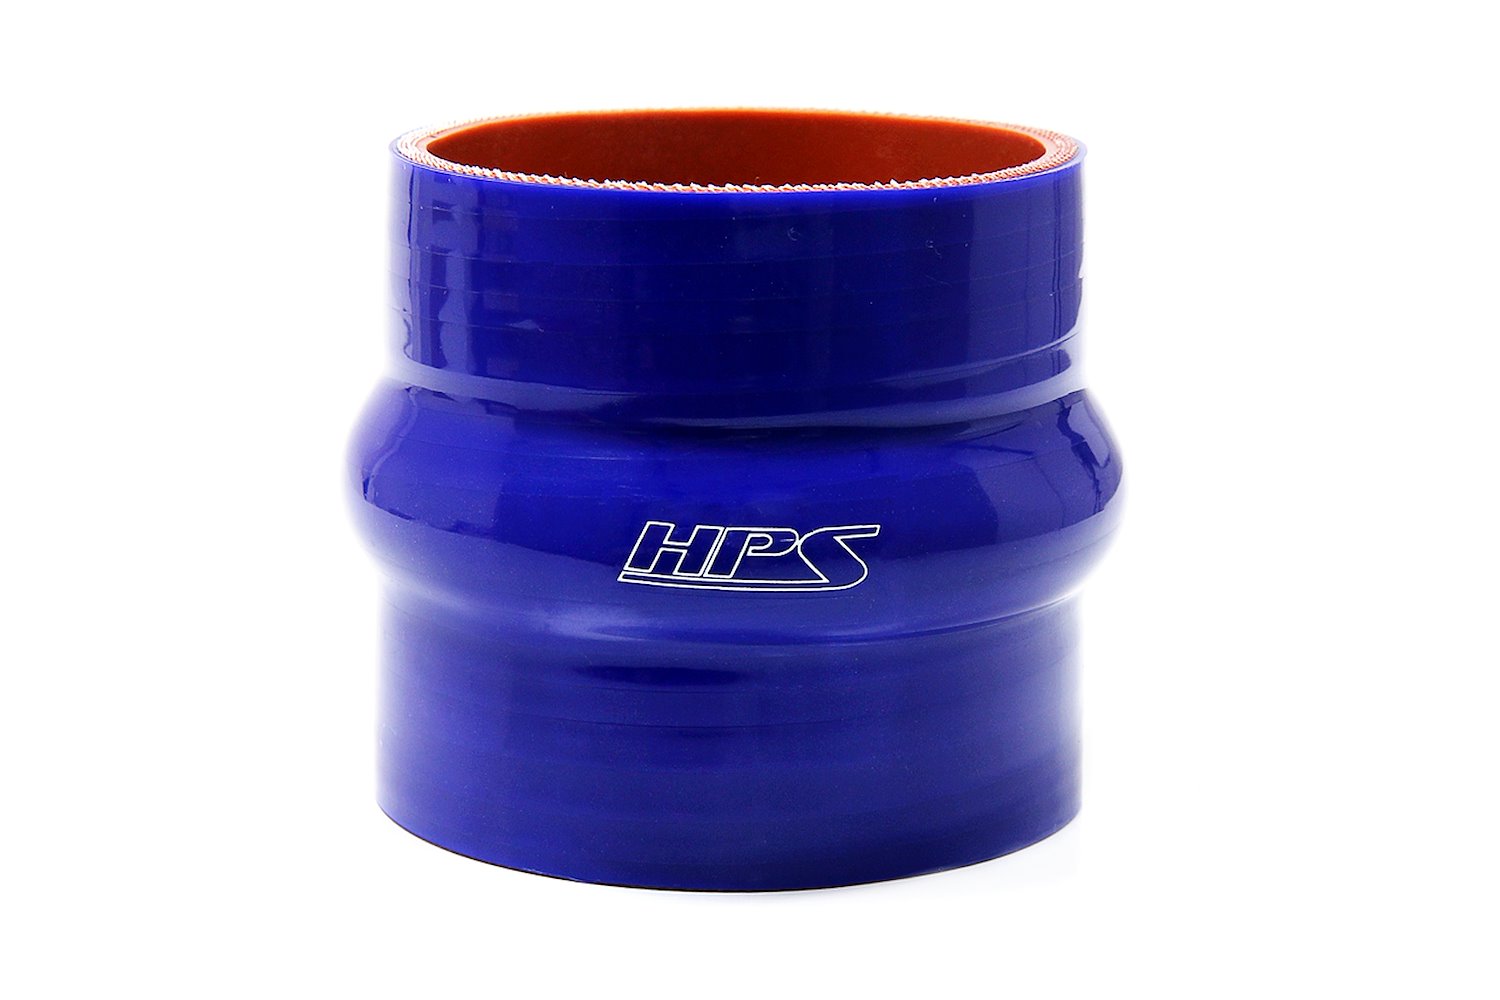 HTSHC-150-L4-BLUE Silicone Hump Coupler Hose, High-Temp 4-Ply Reinforced, 1-1/2 in. ID, 4 in. Long, Blue